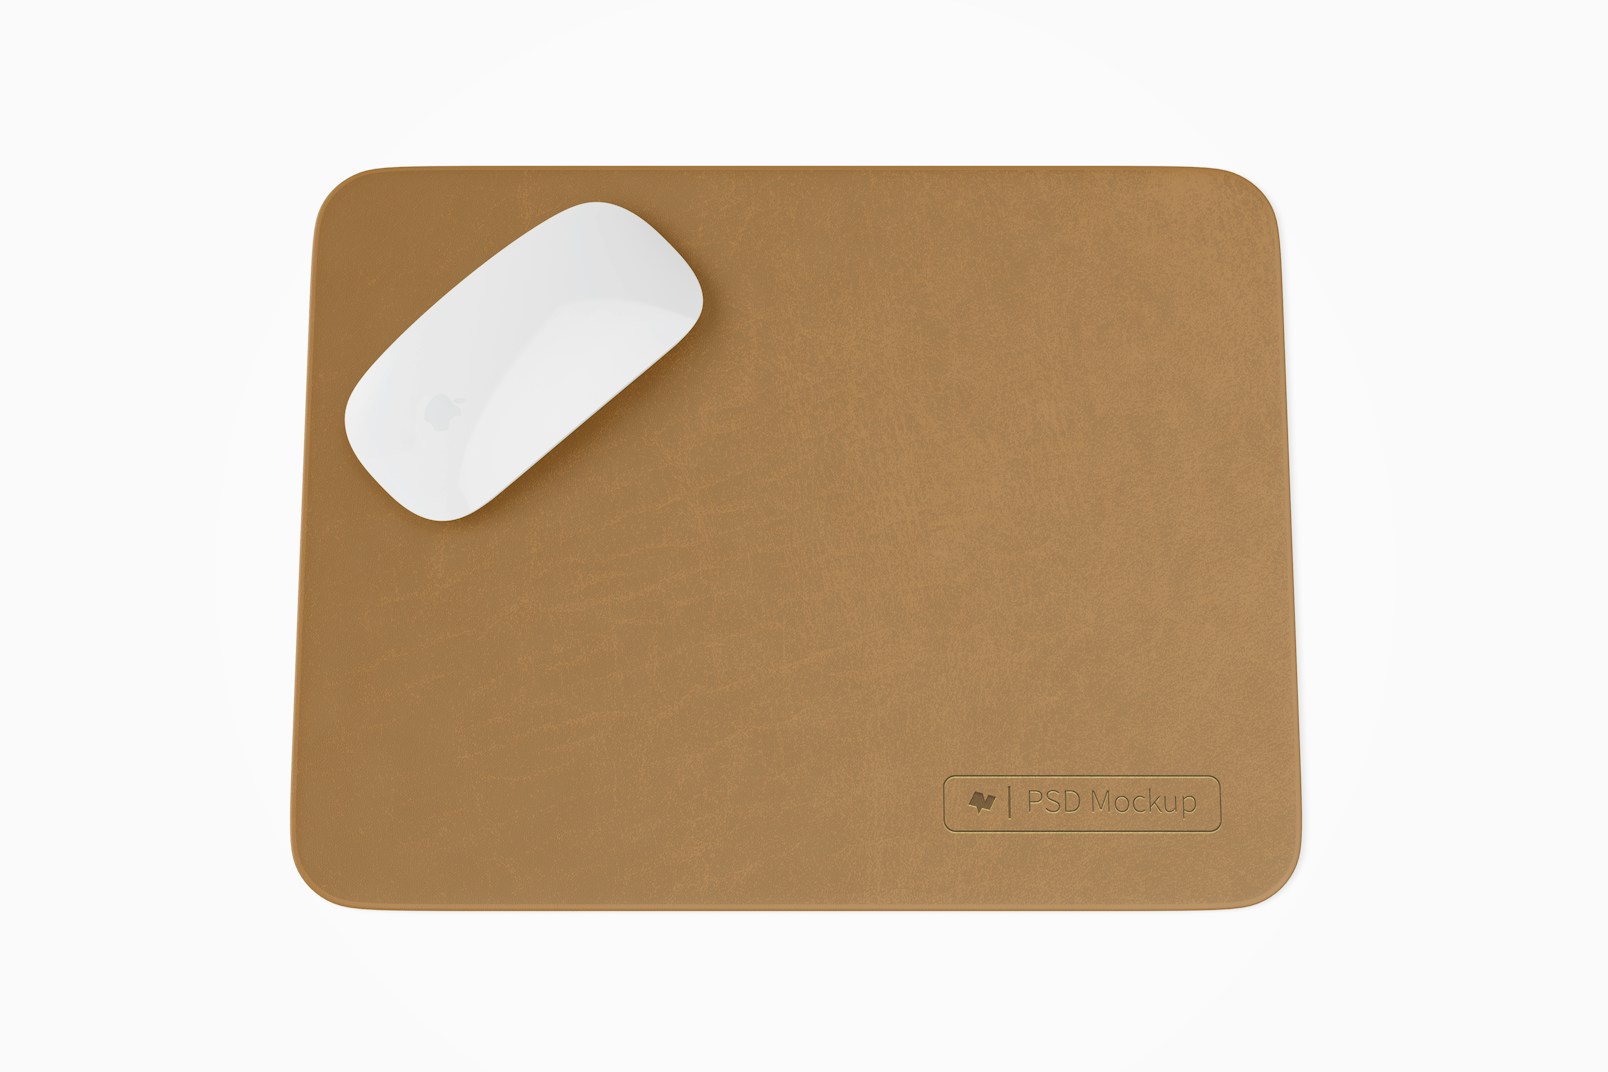 Rectangular Leather Mouse Pad Mockup, Top View